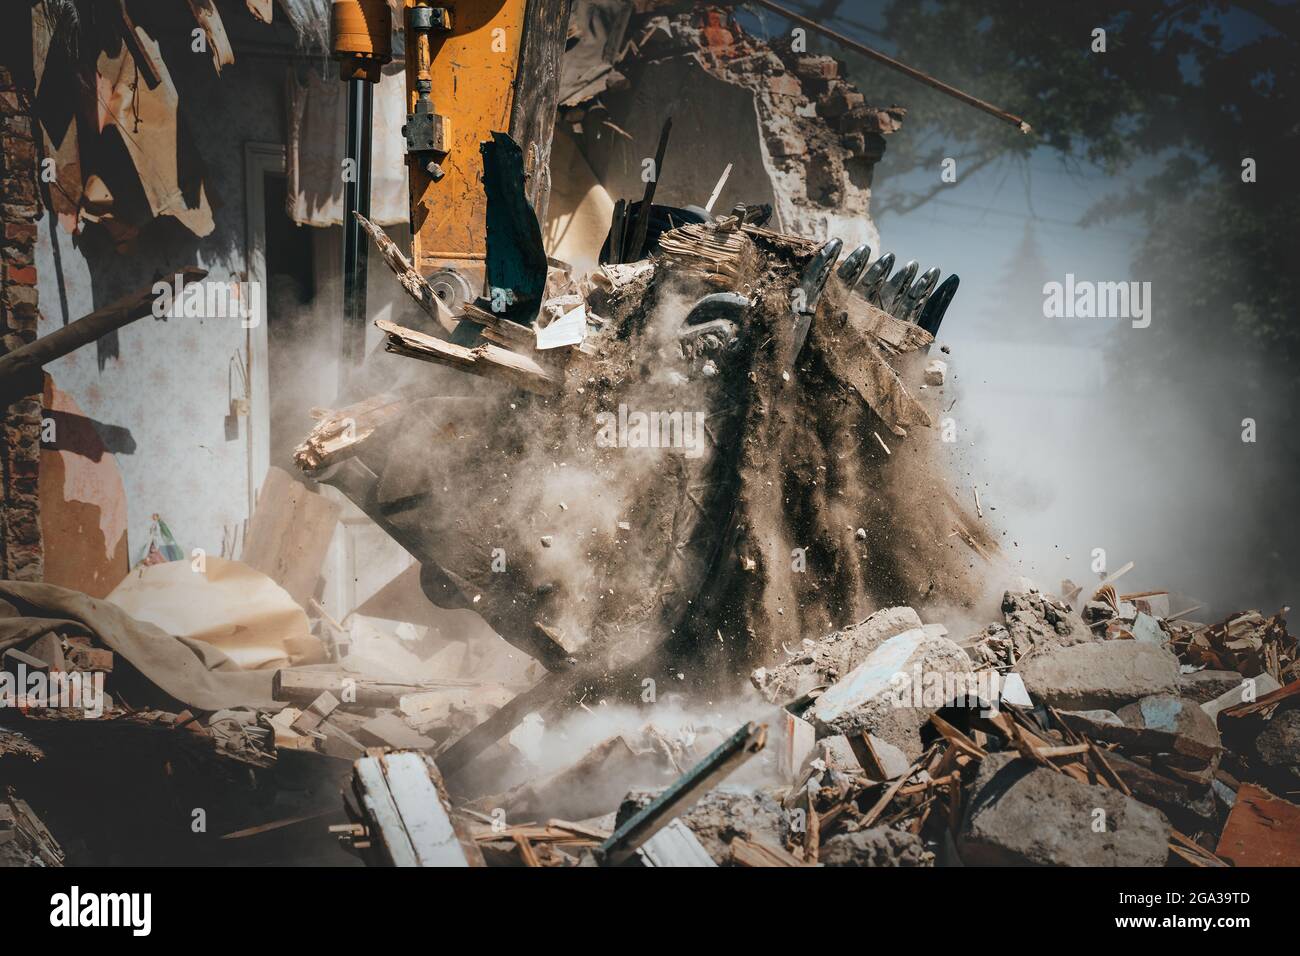 Excavator bucket lifts debris from demolished house, sand and dust pouring, house destruction. Stock Photo